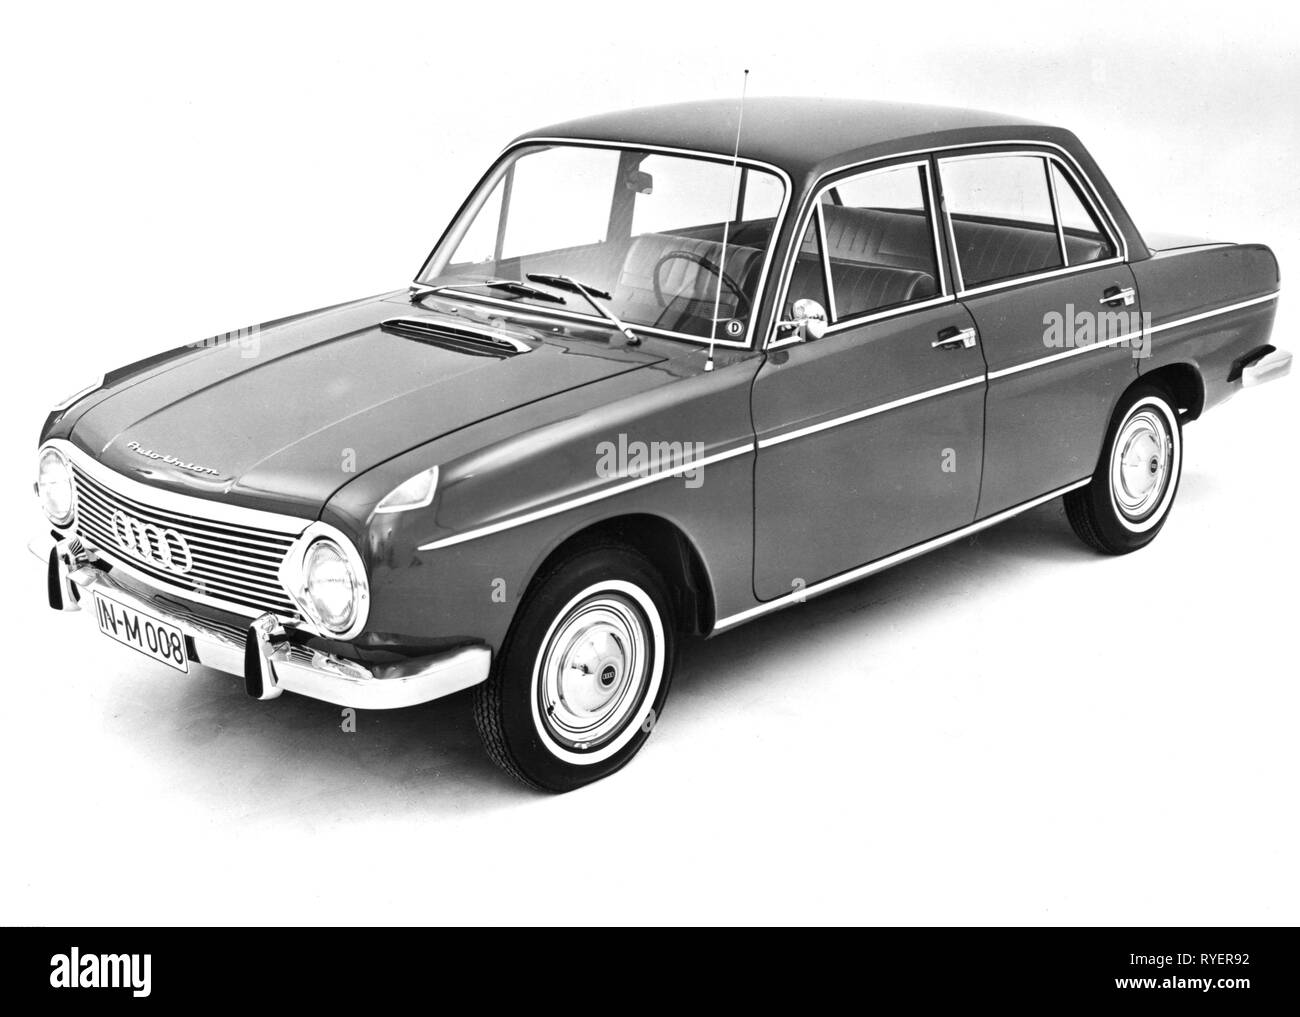 transport / transportation, car, vehicle variants, DKW F 102, view from left ahead, 1963, F102, Auto Union, middle class, limousine, four-door, four doors, radiator grill, radiator grille, radiator cowling, radiator grills, radiator grilles, radiator cowlings, logo, logos, clipping, cut out, cut-out, cut-outs, motor car, auto, automobile, passenger car, motorcar, motorcars, autos, automobiles, passenger cars, Germany, 1960s, 60s, 20th century, transport, transportation, view, views, historic, historical, Additional-Rights-Clearance-Info-Not-Available Stock Photo